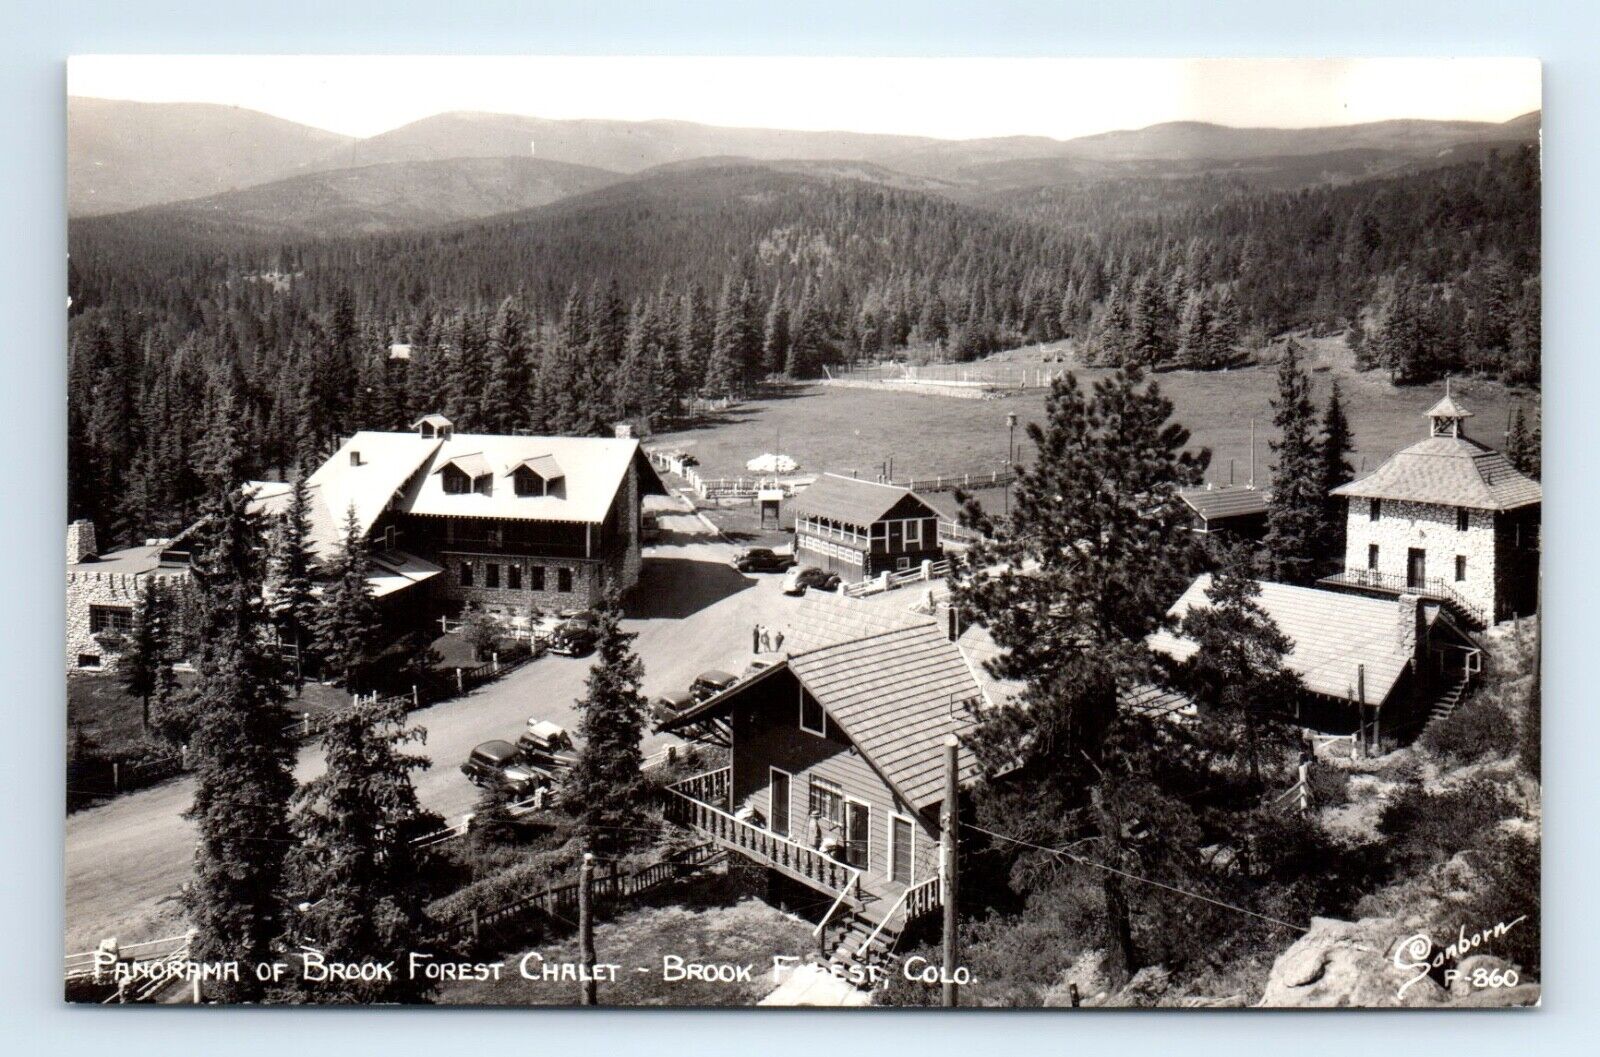 RPPC Brook Forest, CO Postcard - Panorama of Brook Forest Chalet - Sanborn Photo